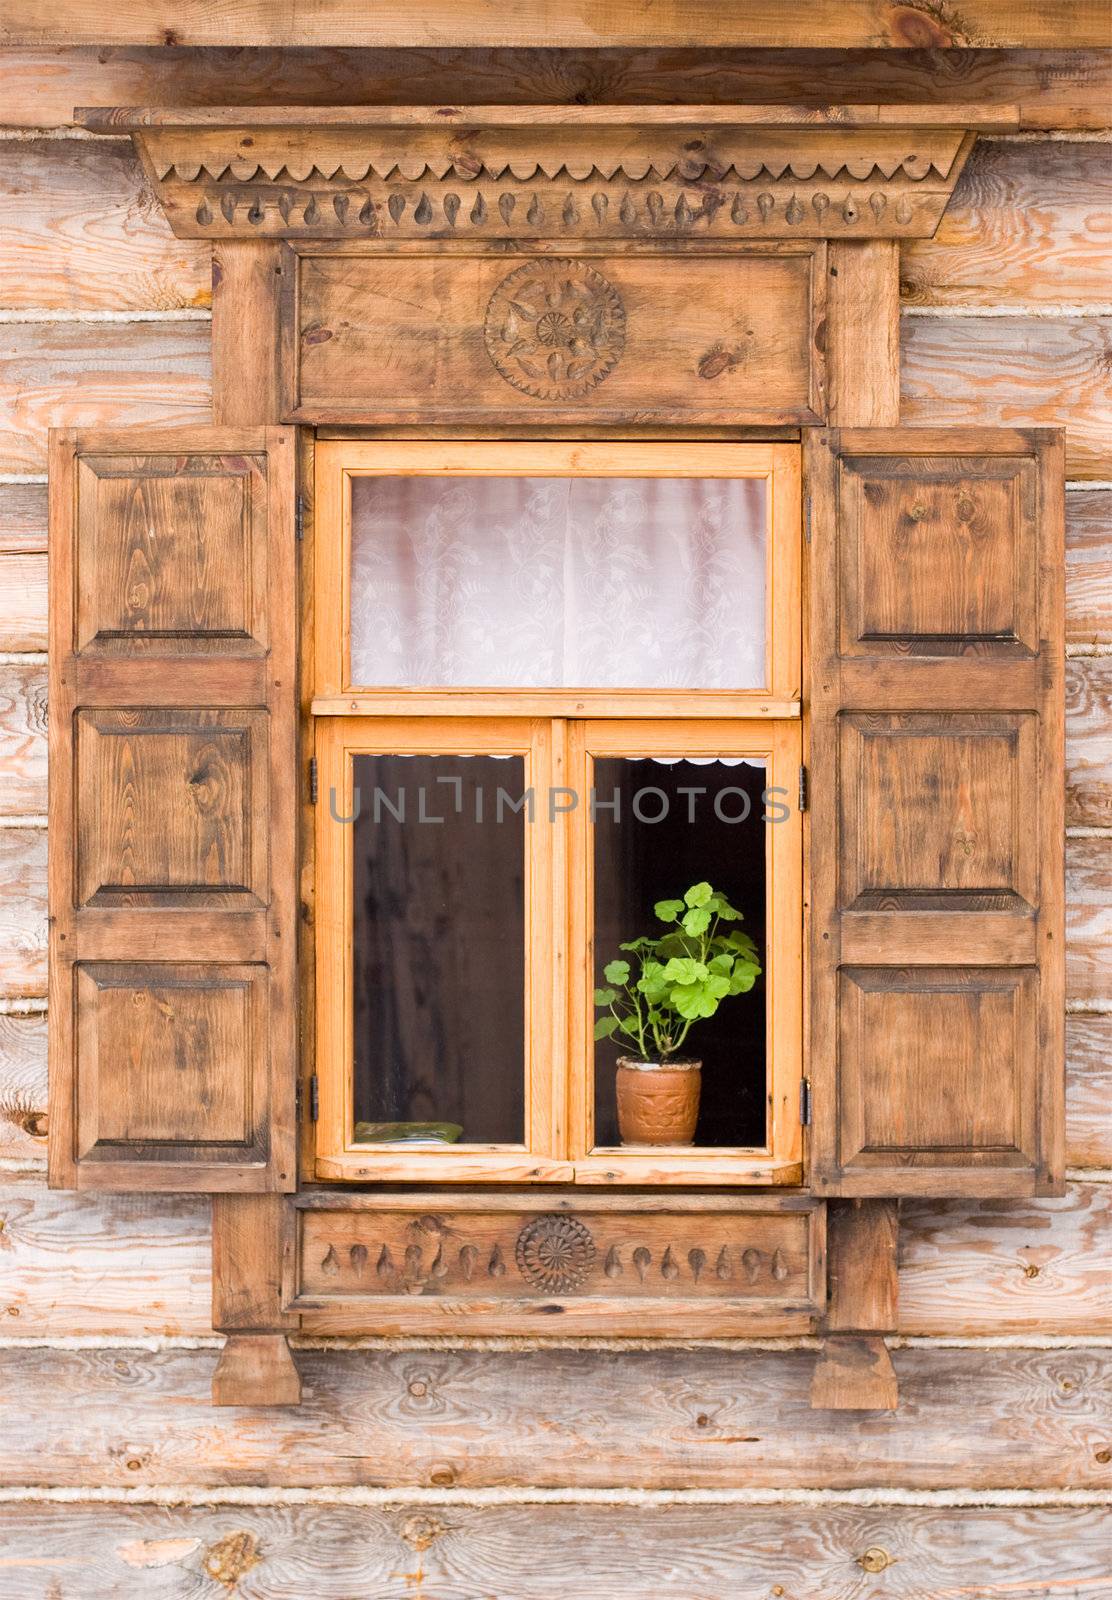 Flower in a pot behind the traditional russian decorated window